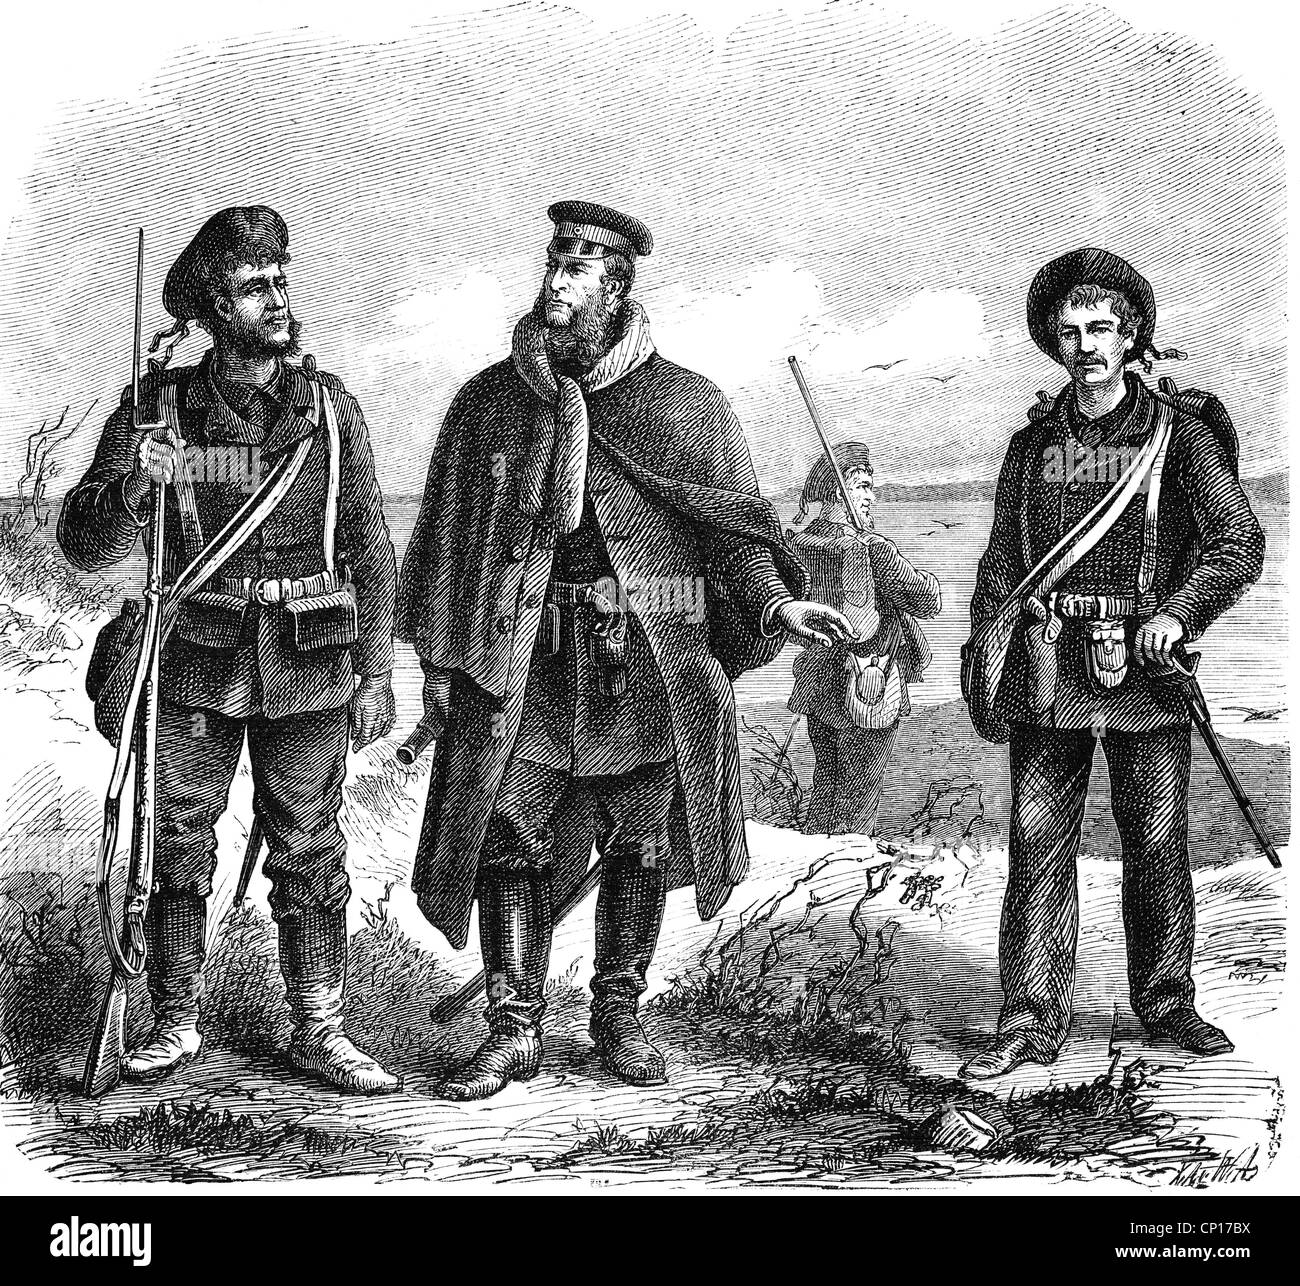 events, Franco-Prussian War 1870 - 1871, soldiers of the German Navy in Orleans, wood engraving after drawing by S. Arnould, 1871, sailor, officer, engineer, field equipment, German, France, Franco - Prussian, 19th century, historic, historical, people, Additional-Rights-Clearences-Not Available Stock Photo